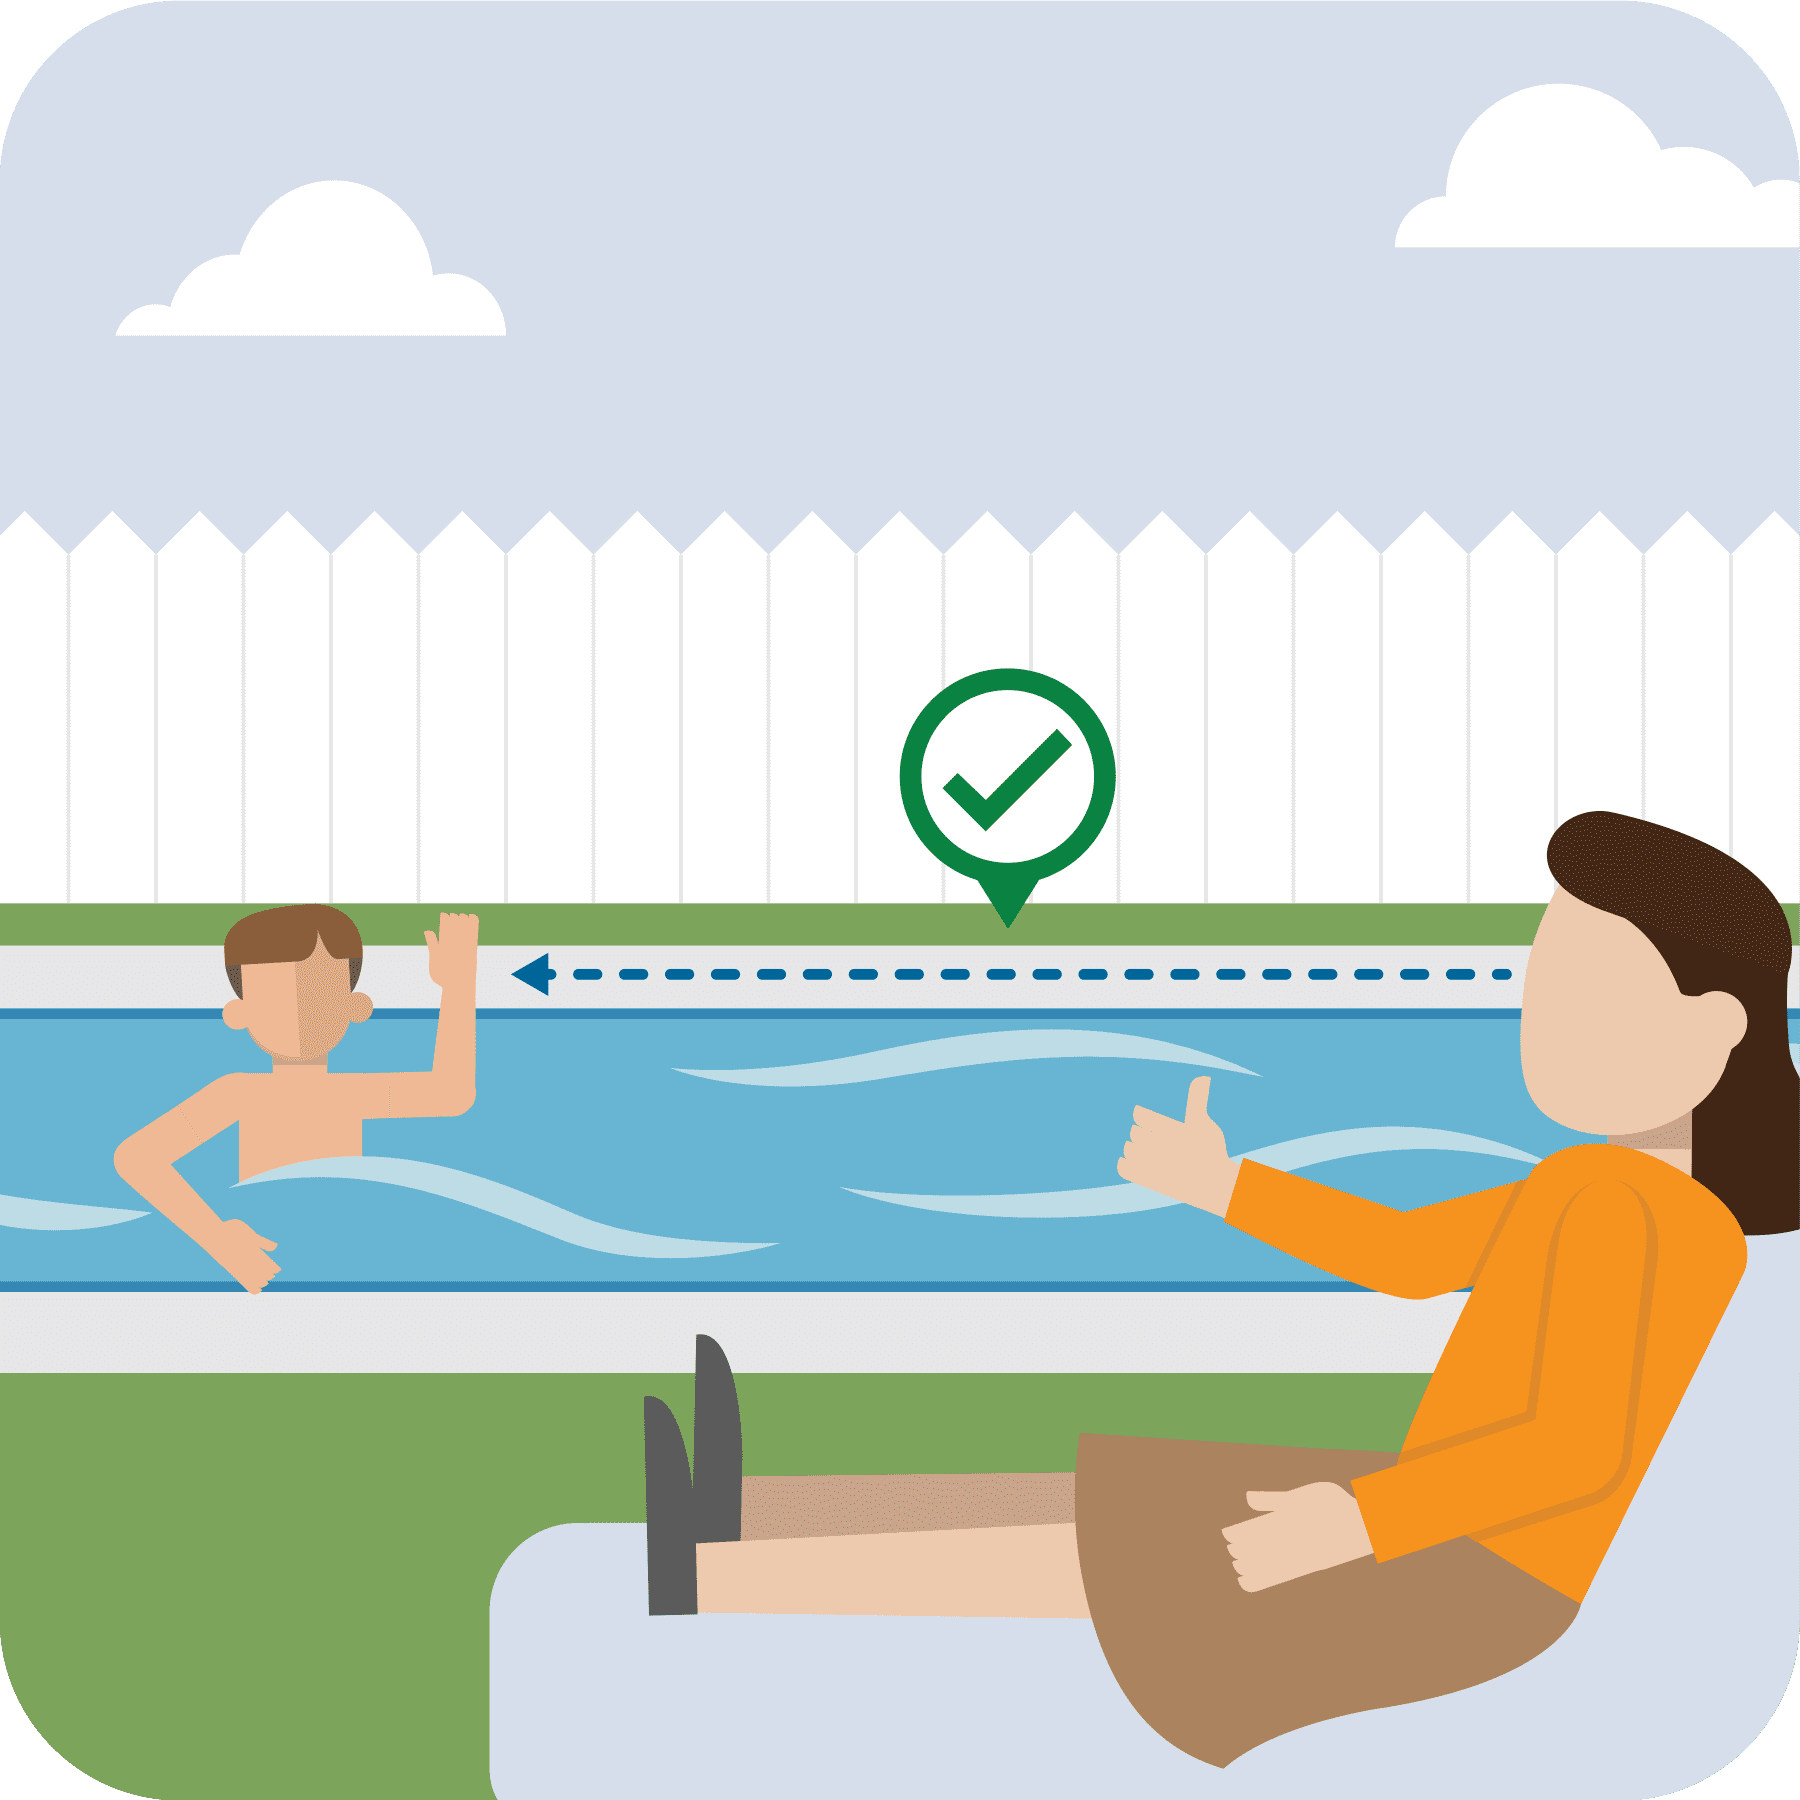 A woman sitting on a pool chair watching the child in the pool.